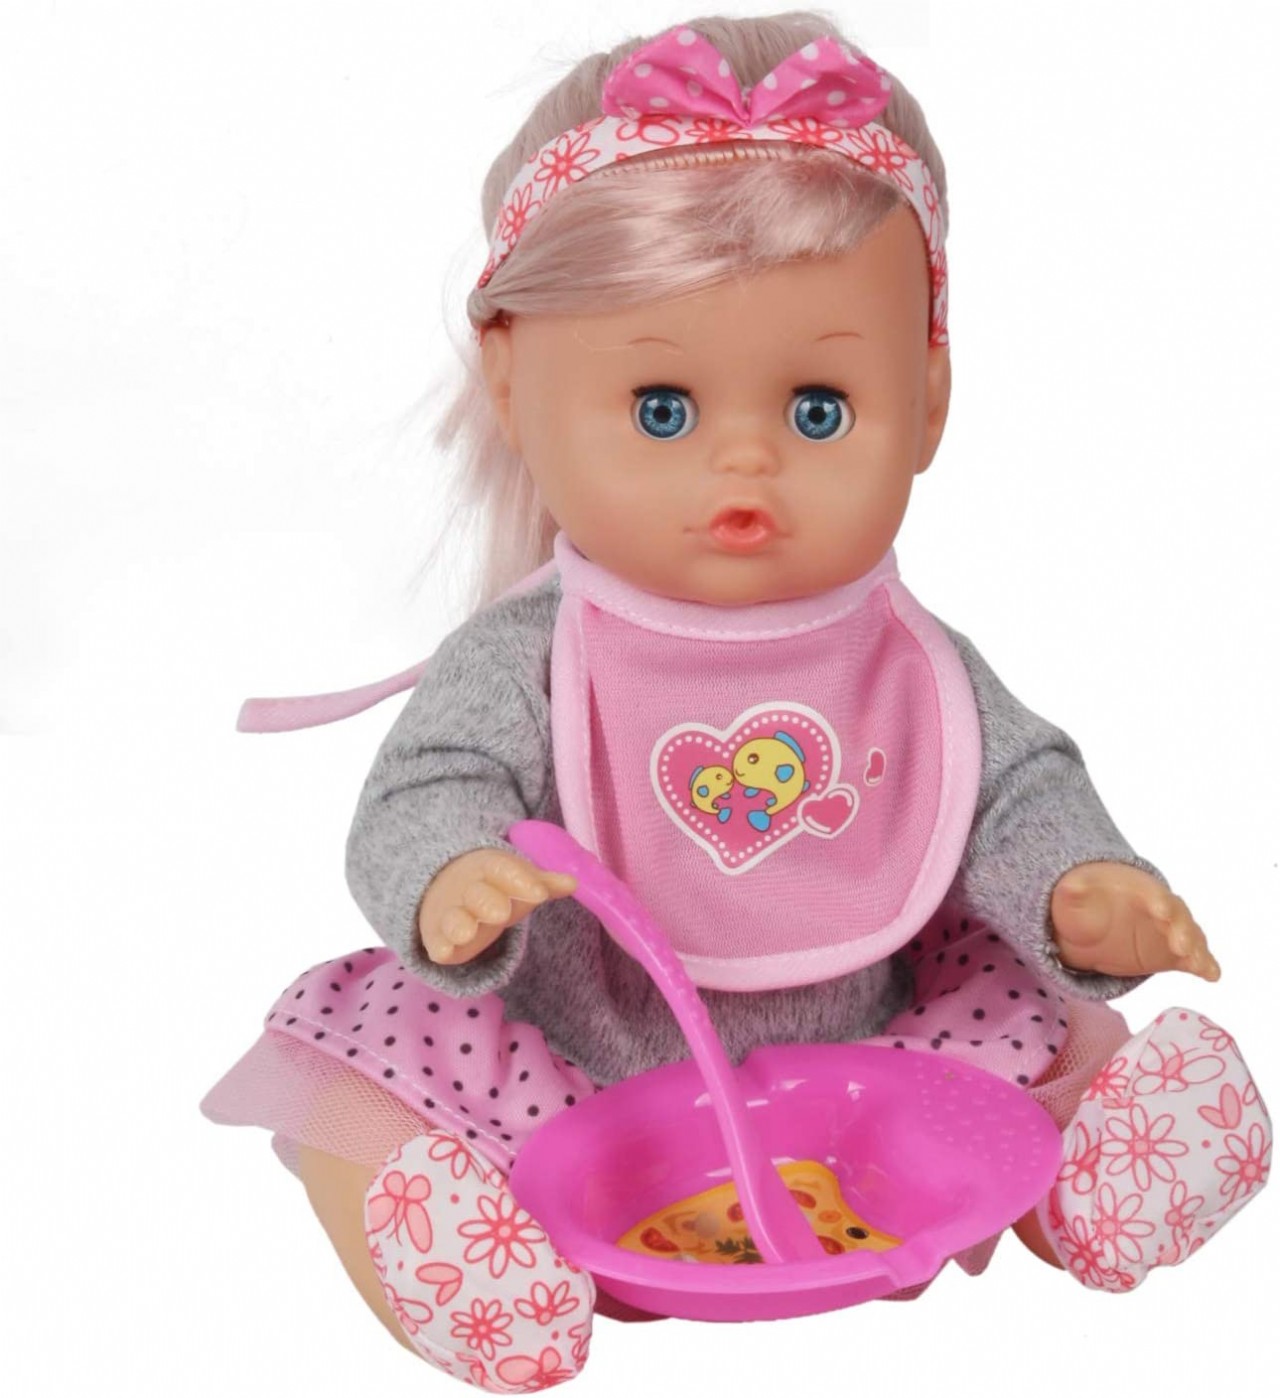 Doll Baby with Clothes Lovely Newborn Doll Hairband Shoes 2 Bibs Nursing Bottle Plate